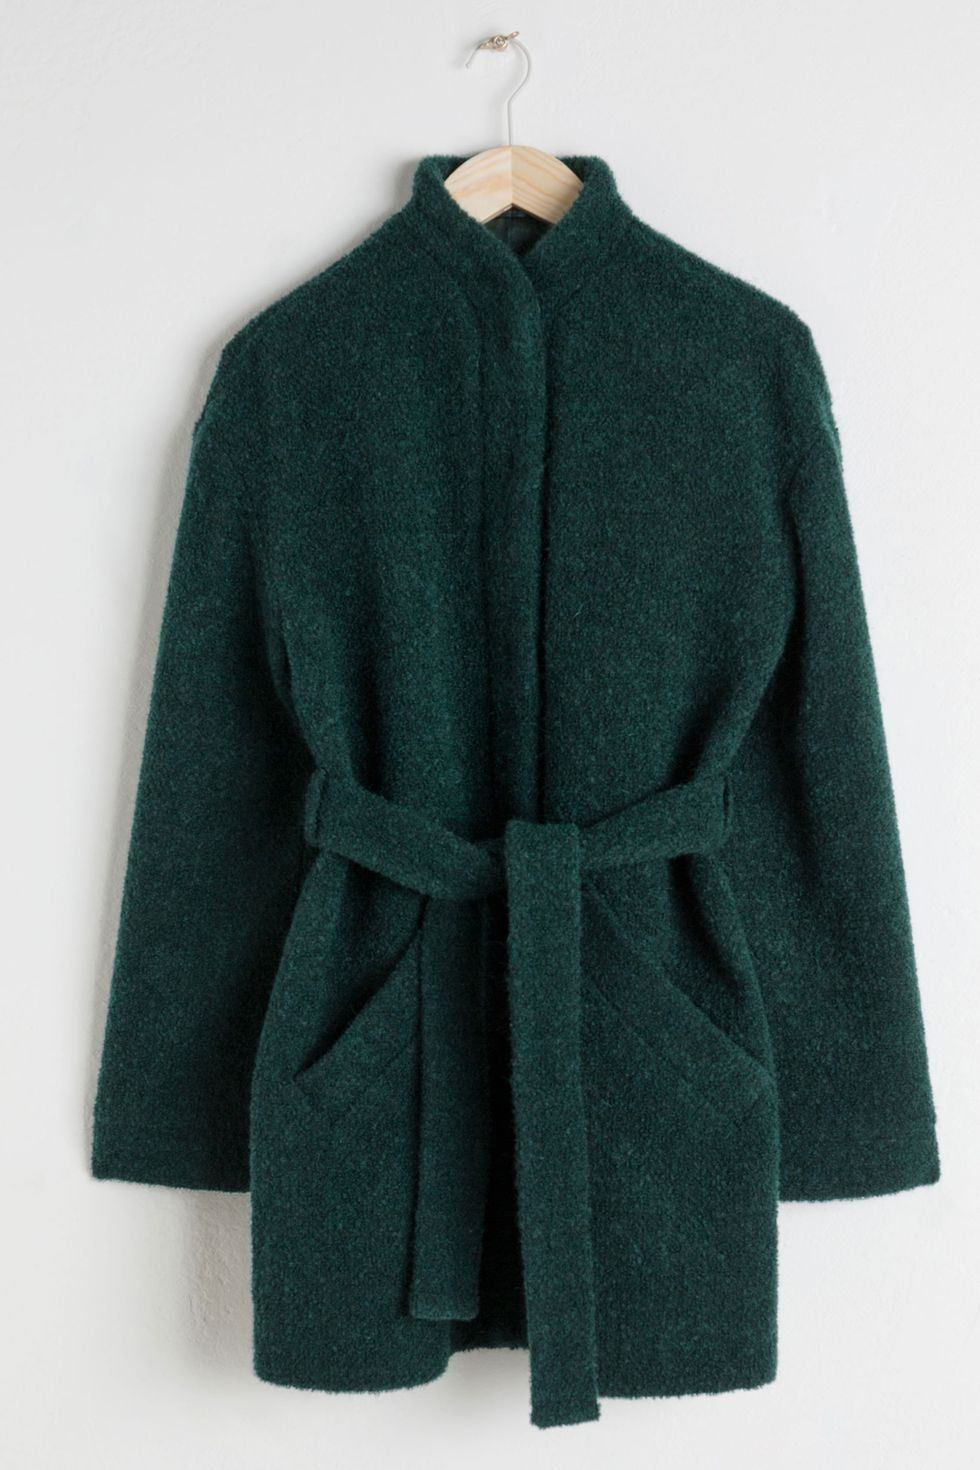 Clothing, Outerwear, Overcoat, Sleeve, Coat, Green, Collar, Robe, Wrap, Costume, 